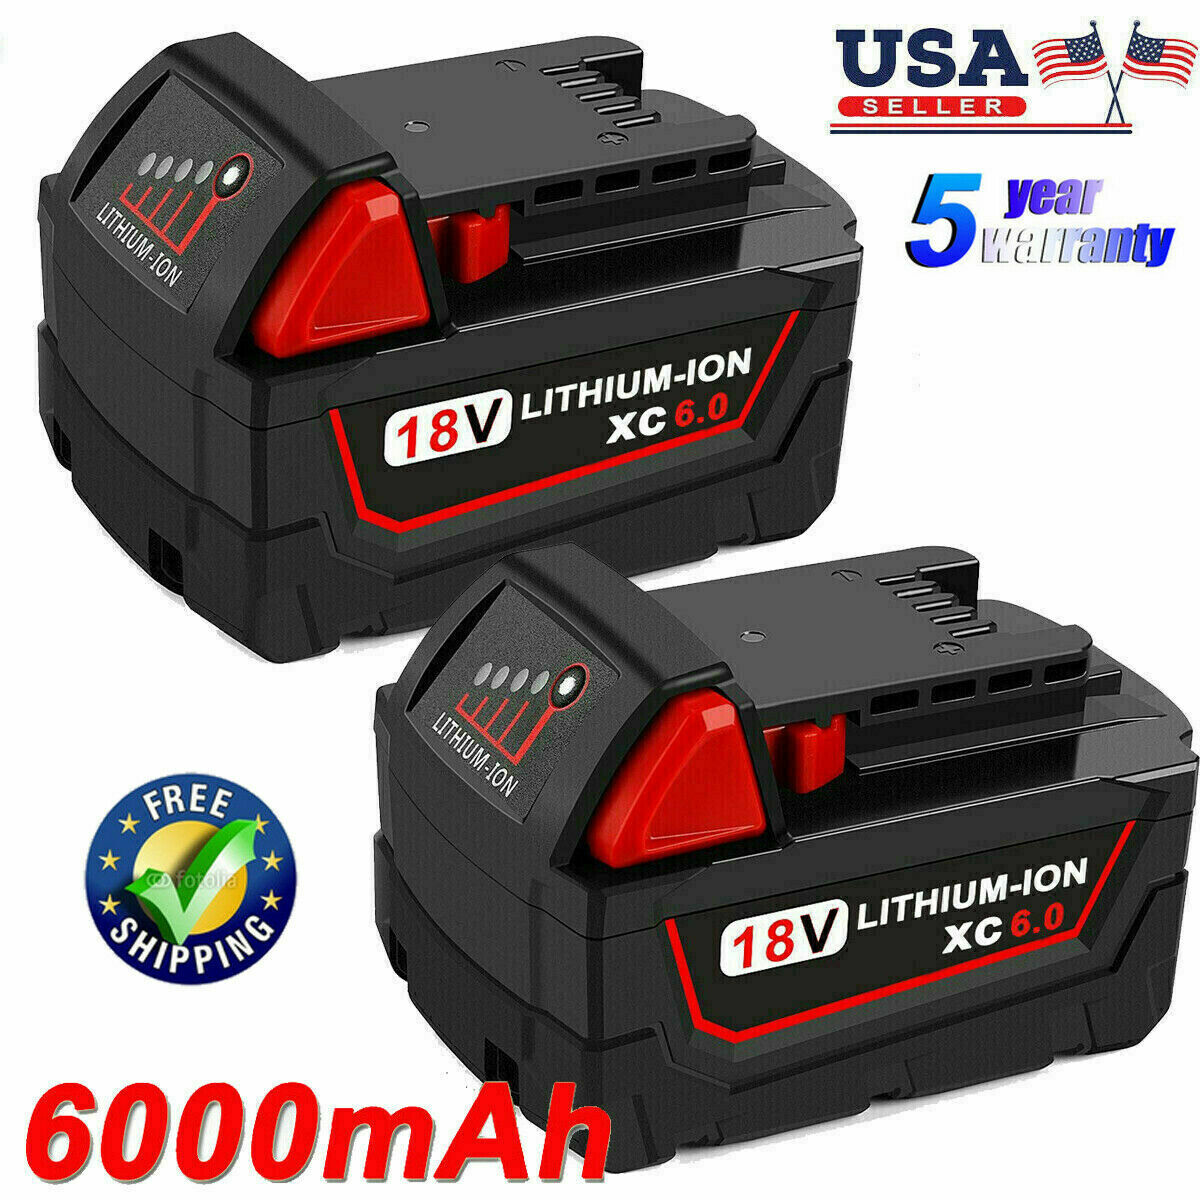 (qty 2) For Milwaukee M18 Lithium Xc 6.0 Ah Extended Capacity Battery 48-11-1852